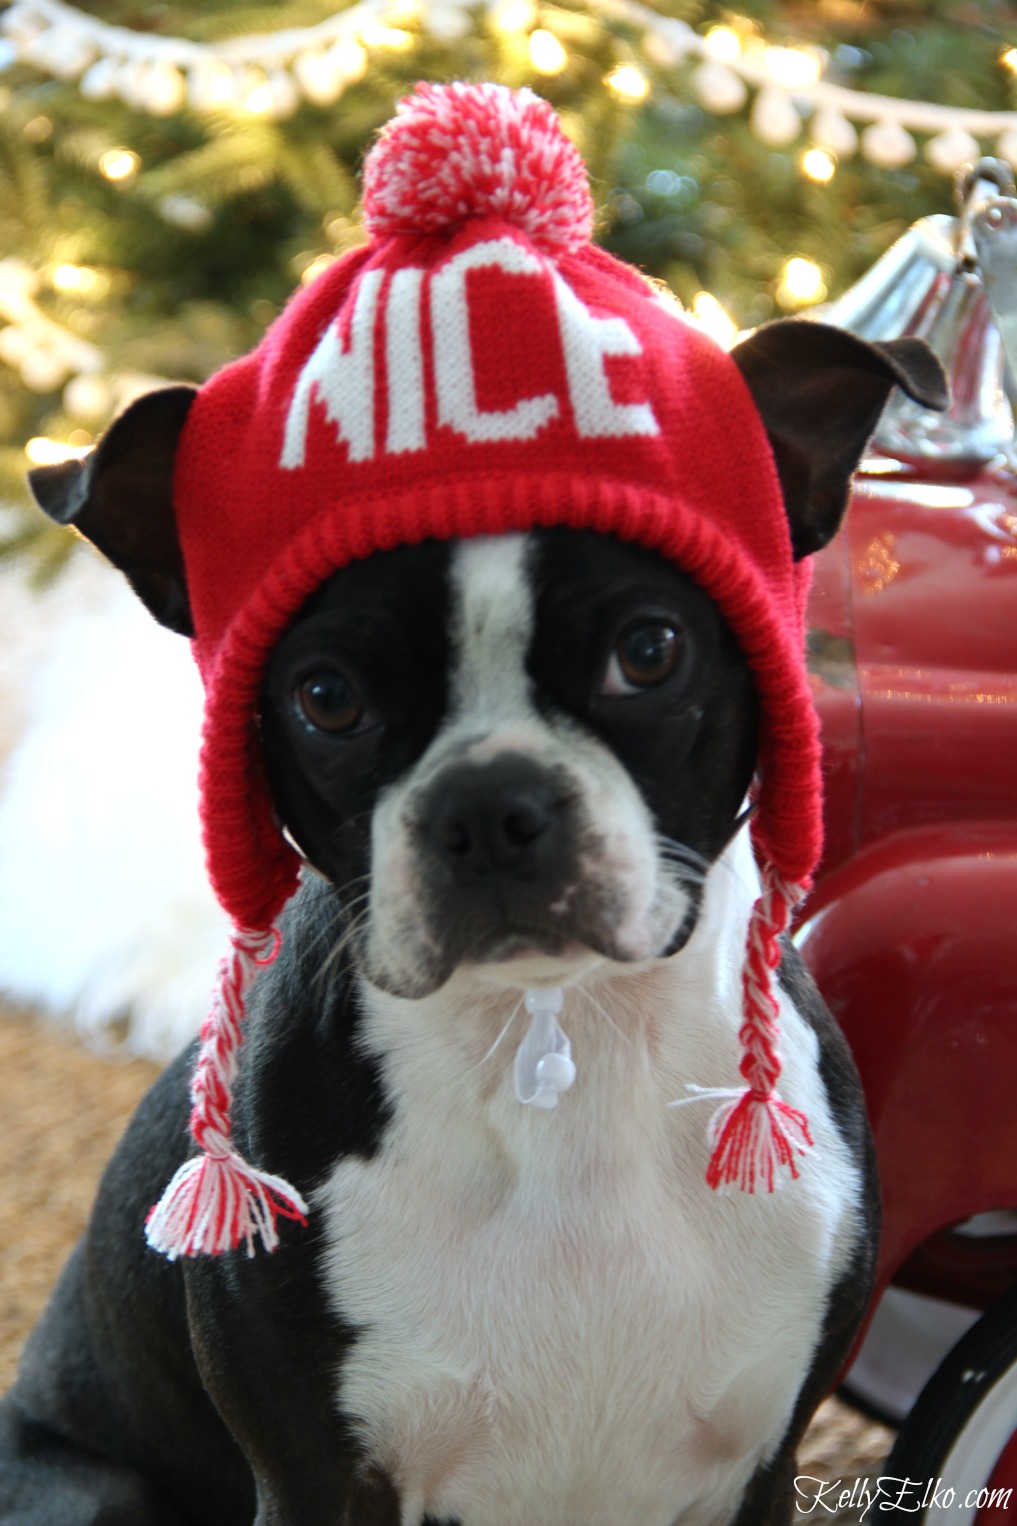 Dogs in Sweaters! Love this cute Christmas hat on this Boston Terrier kellyelko.com #petclothes #dogclothes #dogsweater #bostonterrier #kellyelko